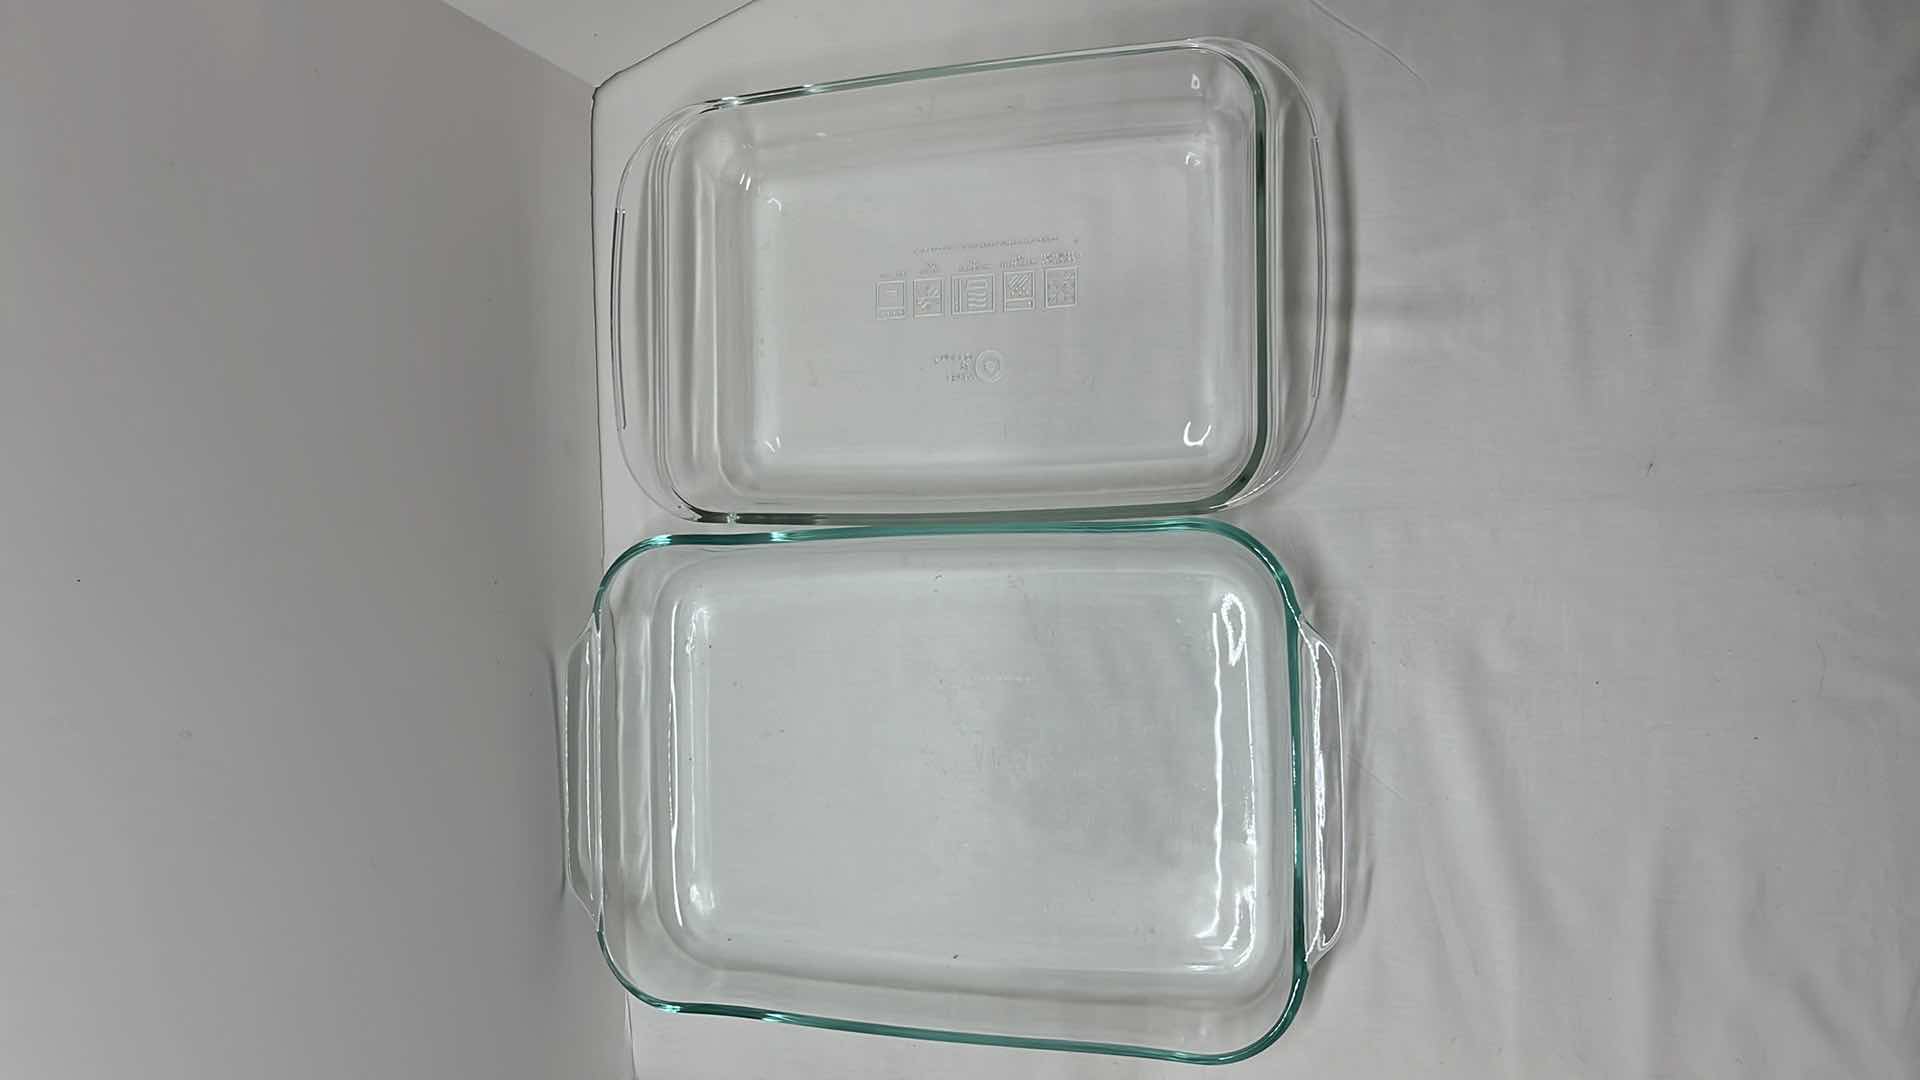 Photo 2 of PYREX CORNING WARE CLEAR GLASS 4.8 QUART OBLONG BAKING DISH (#234) & MADE BY DESIGN CLEAR GLASS 3 QT OBLONG BAKING DISH